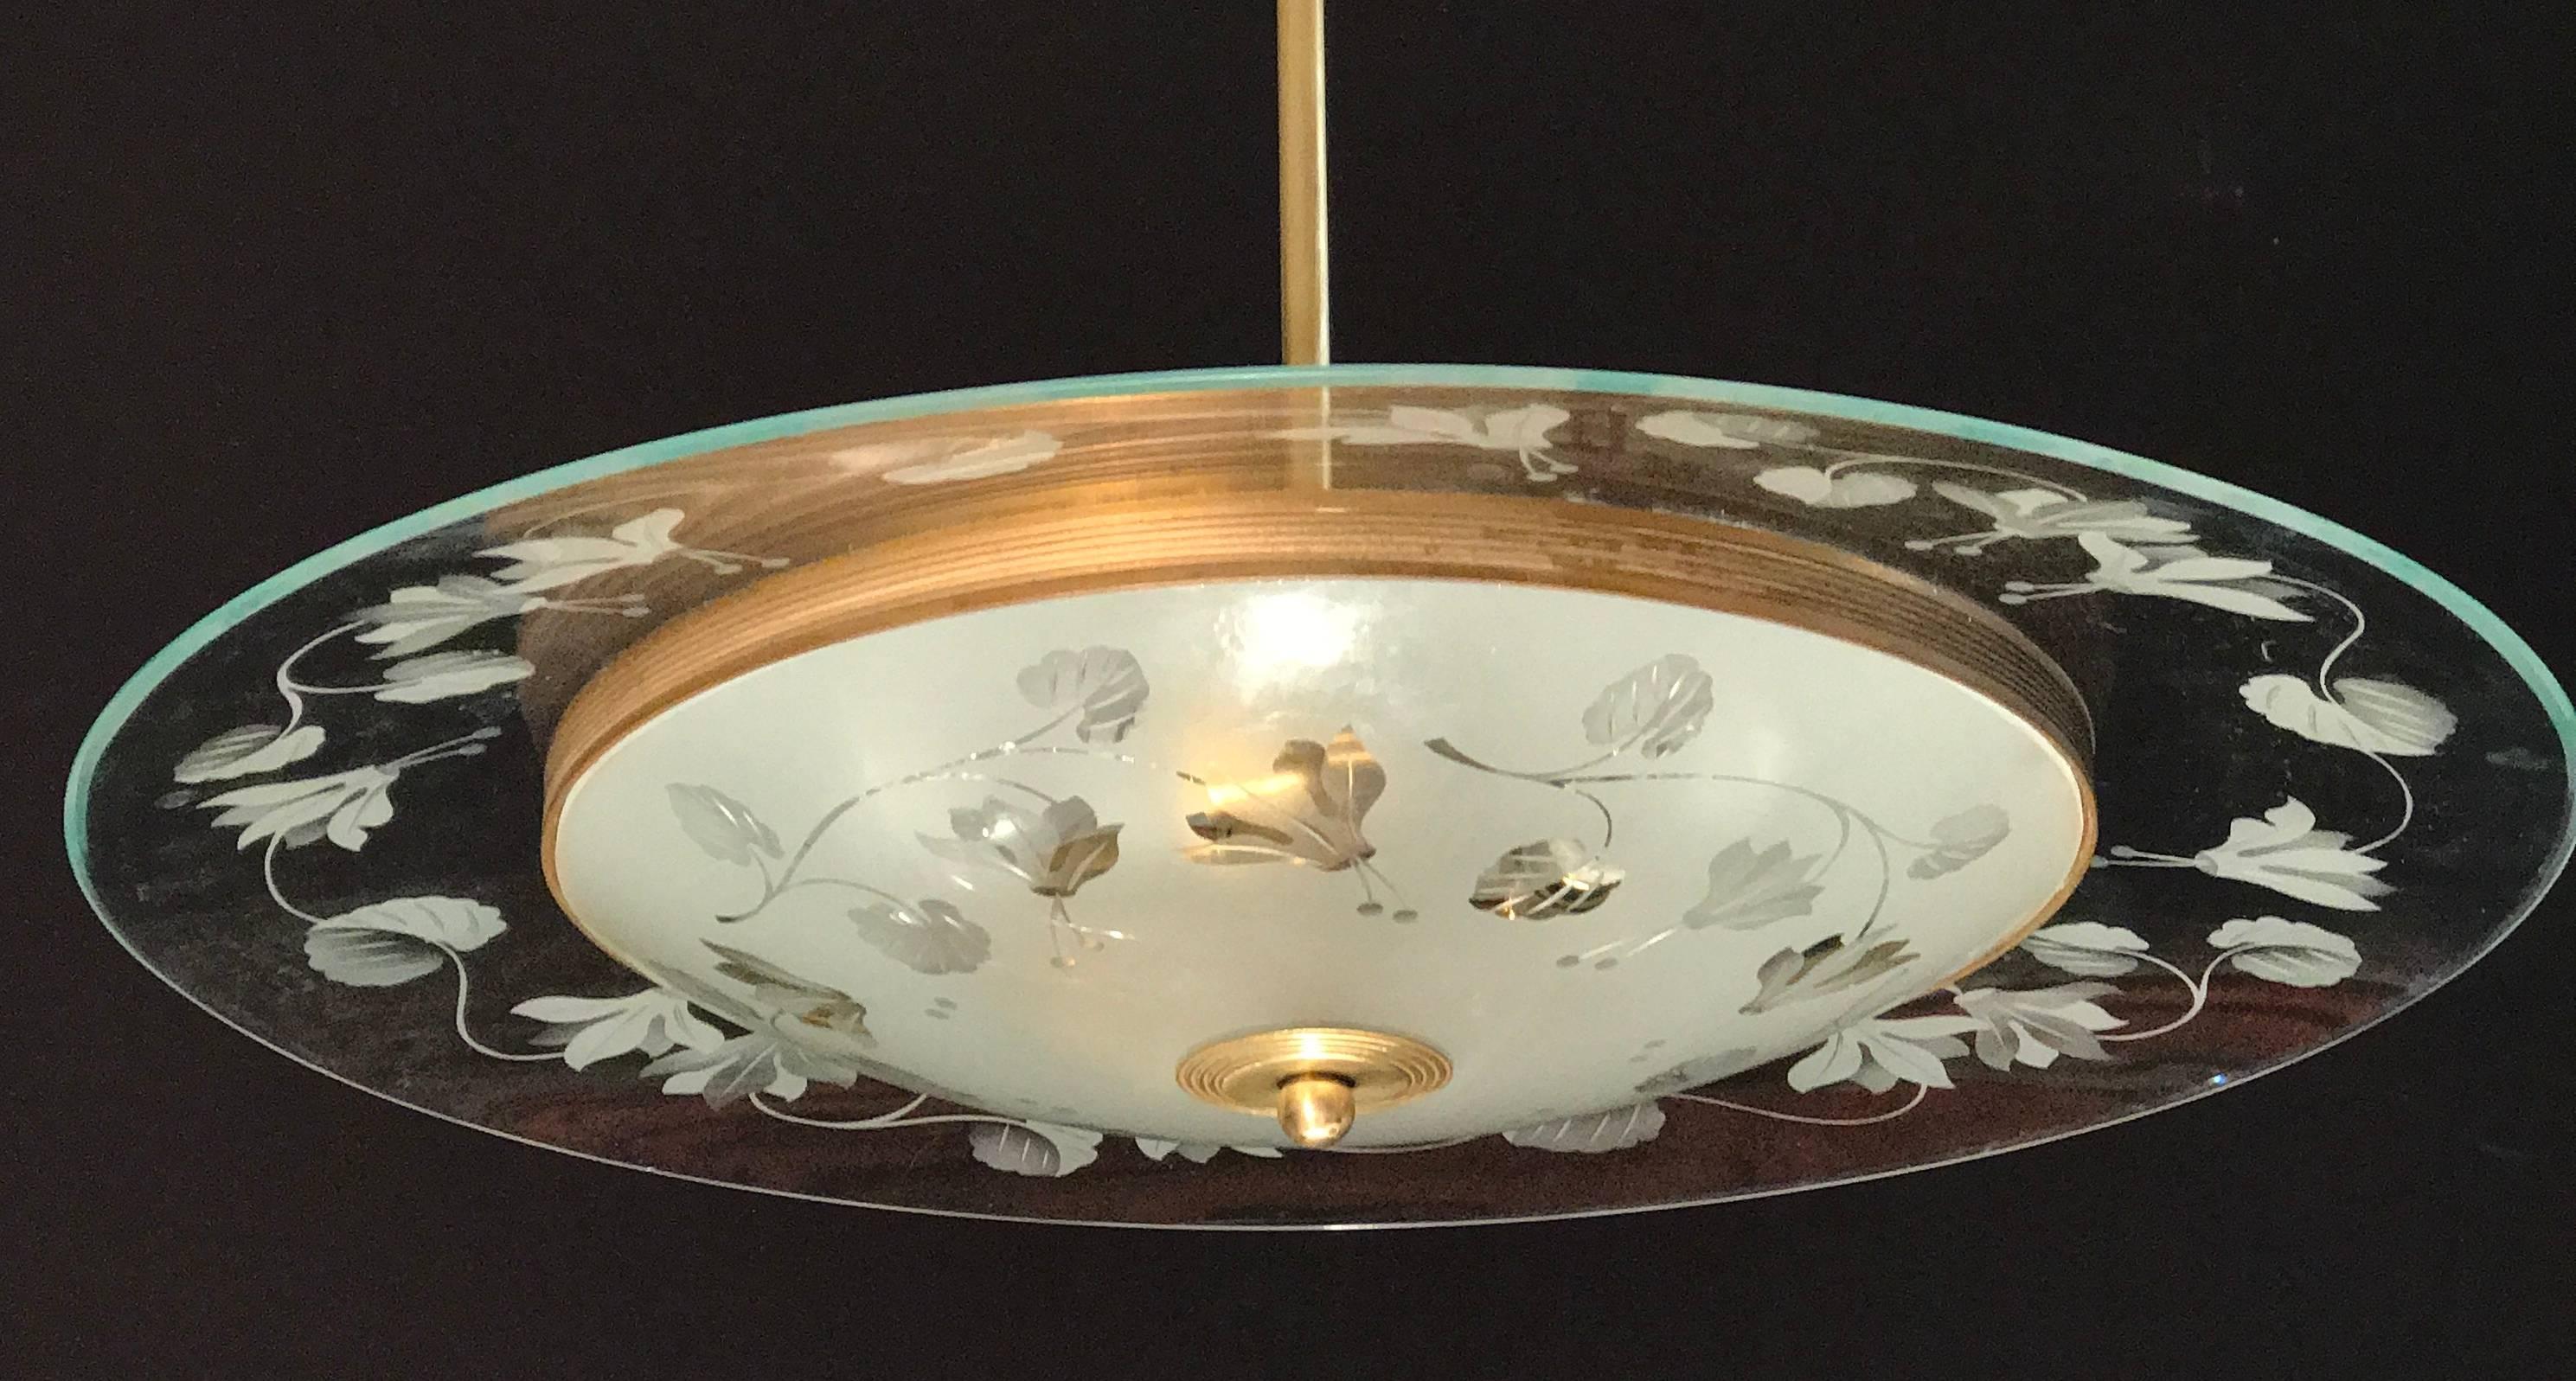 Finely hand chiseled glass with hibiscus motifs with brass rim in excellent vintage condition. The disc covering three E 14 light bulbs. This piece is from Fontana Arte designed by Pietro Chiesa one of the greatest Italian deco designer.